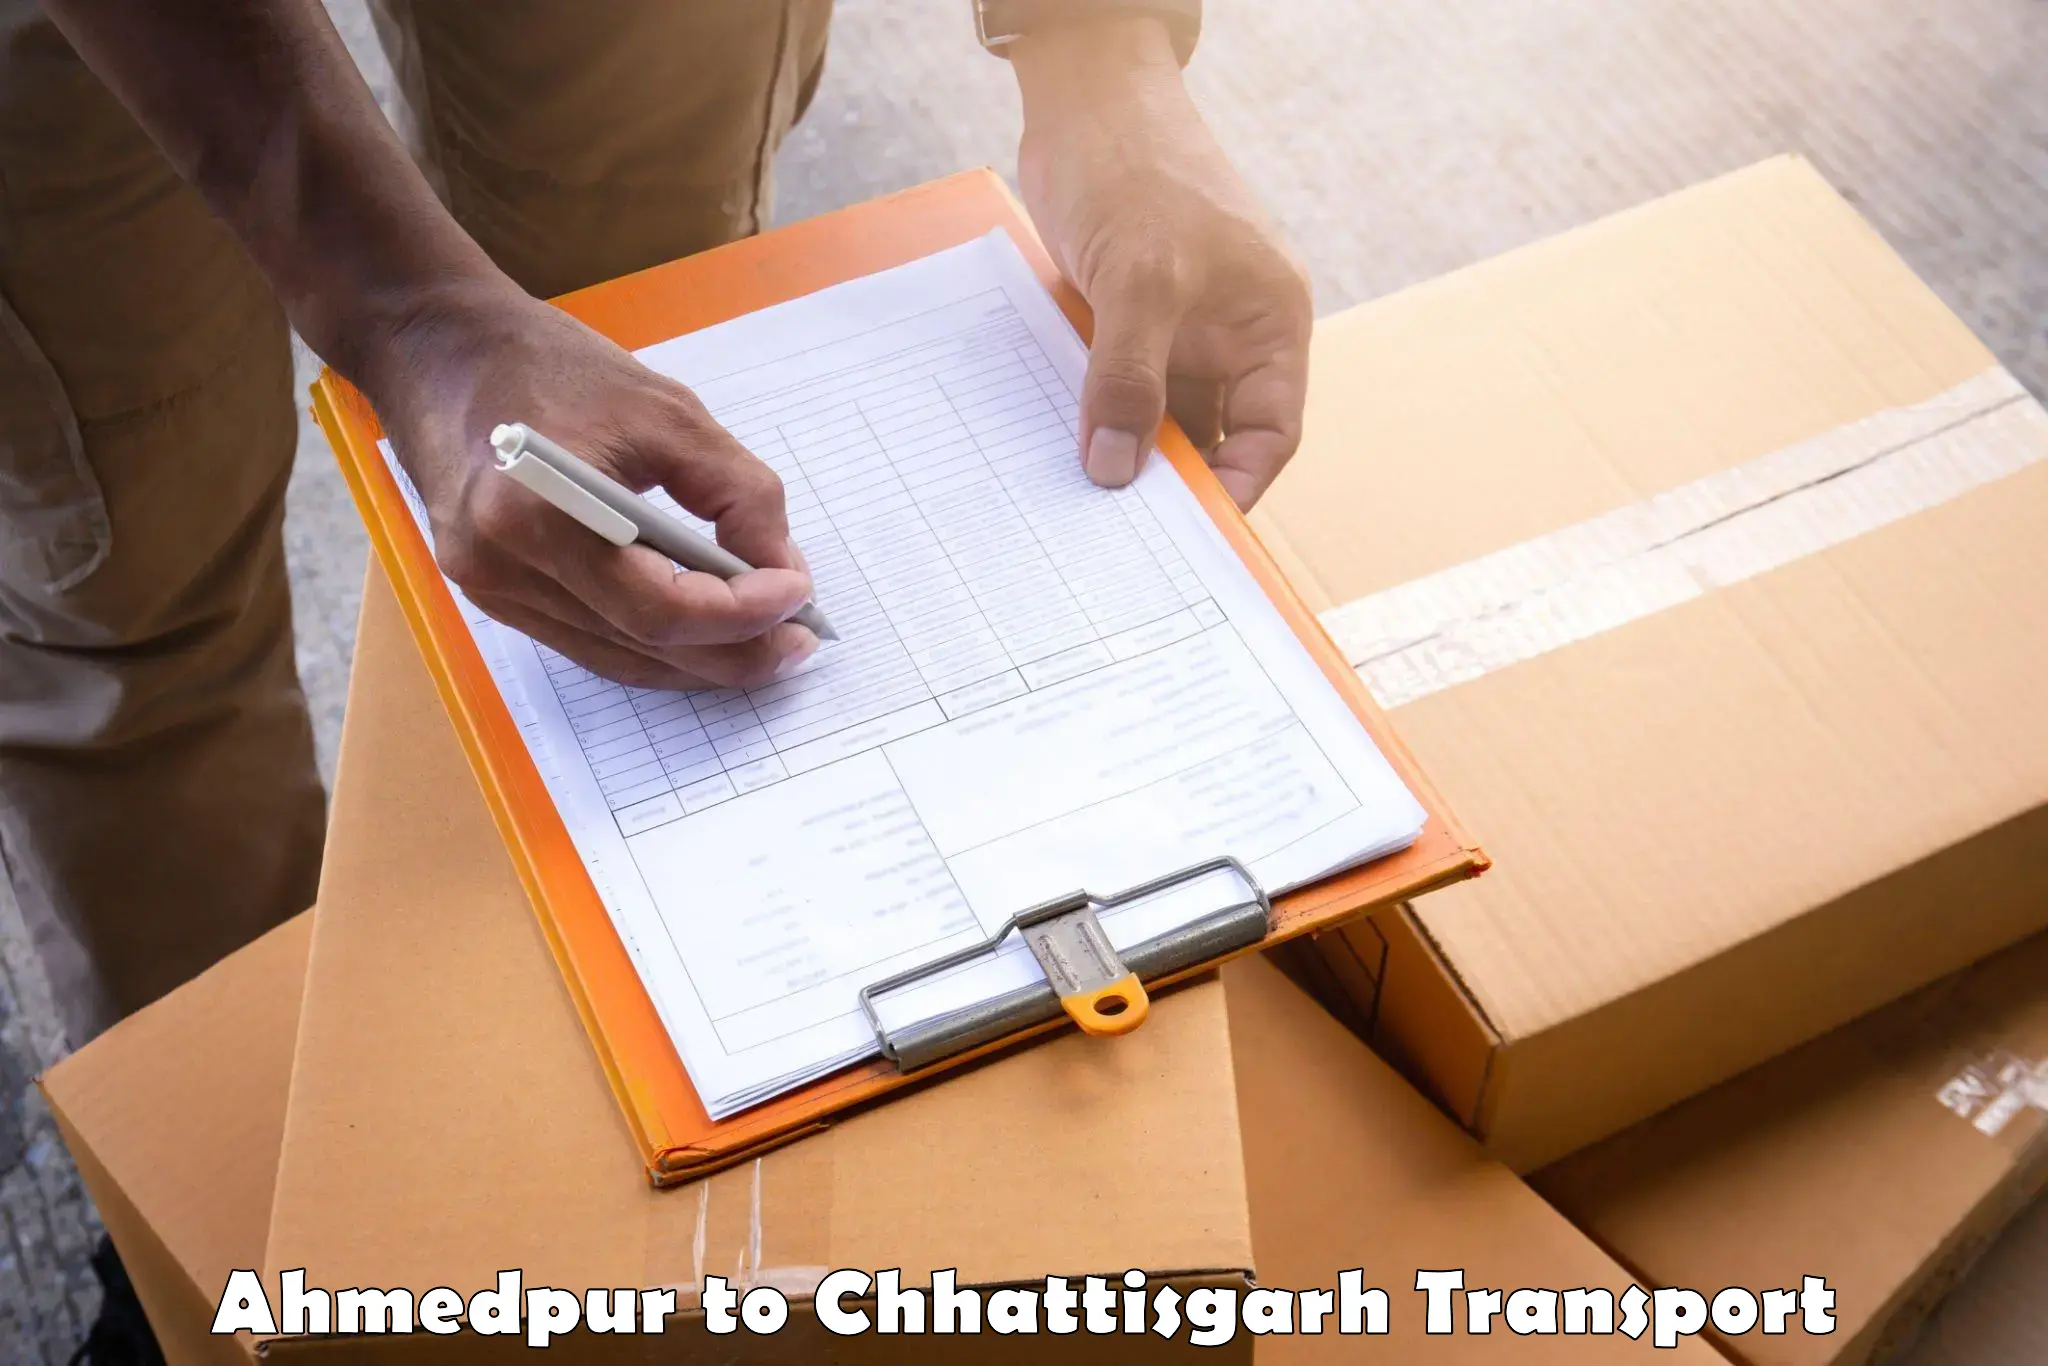 Package delivery services in Ahmedpur to Chhattisgarh